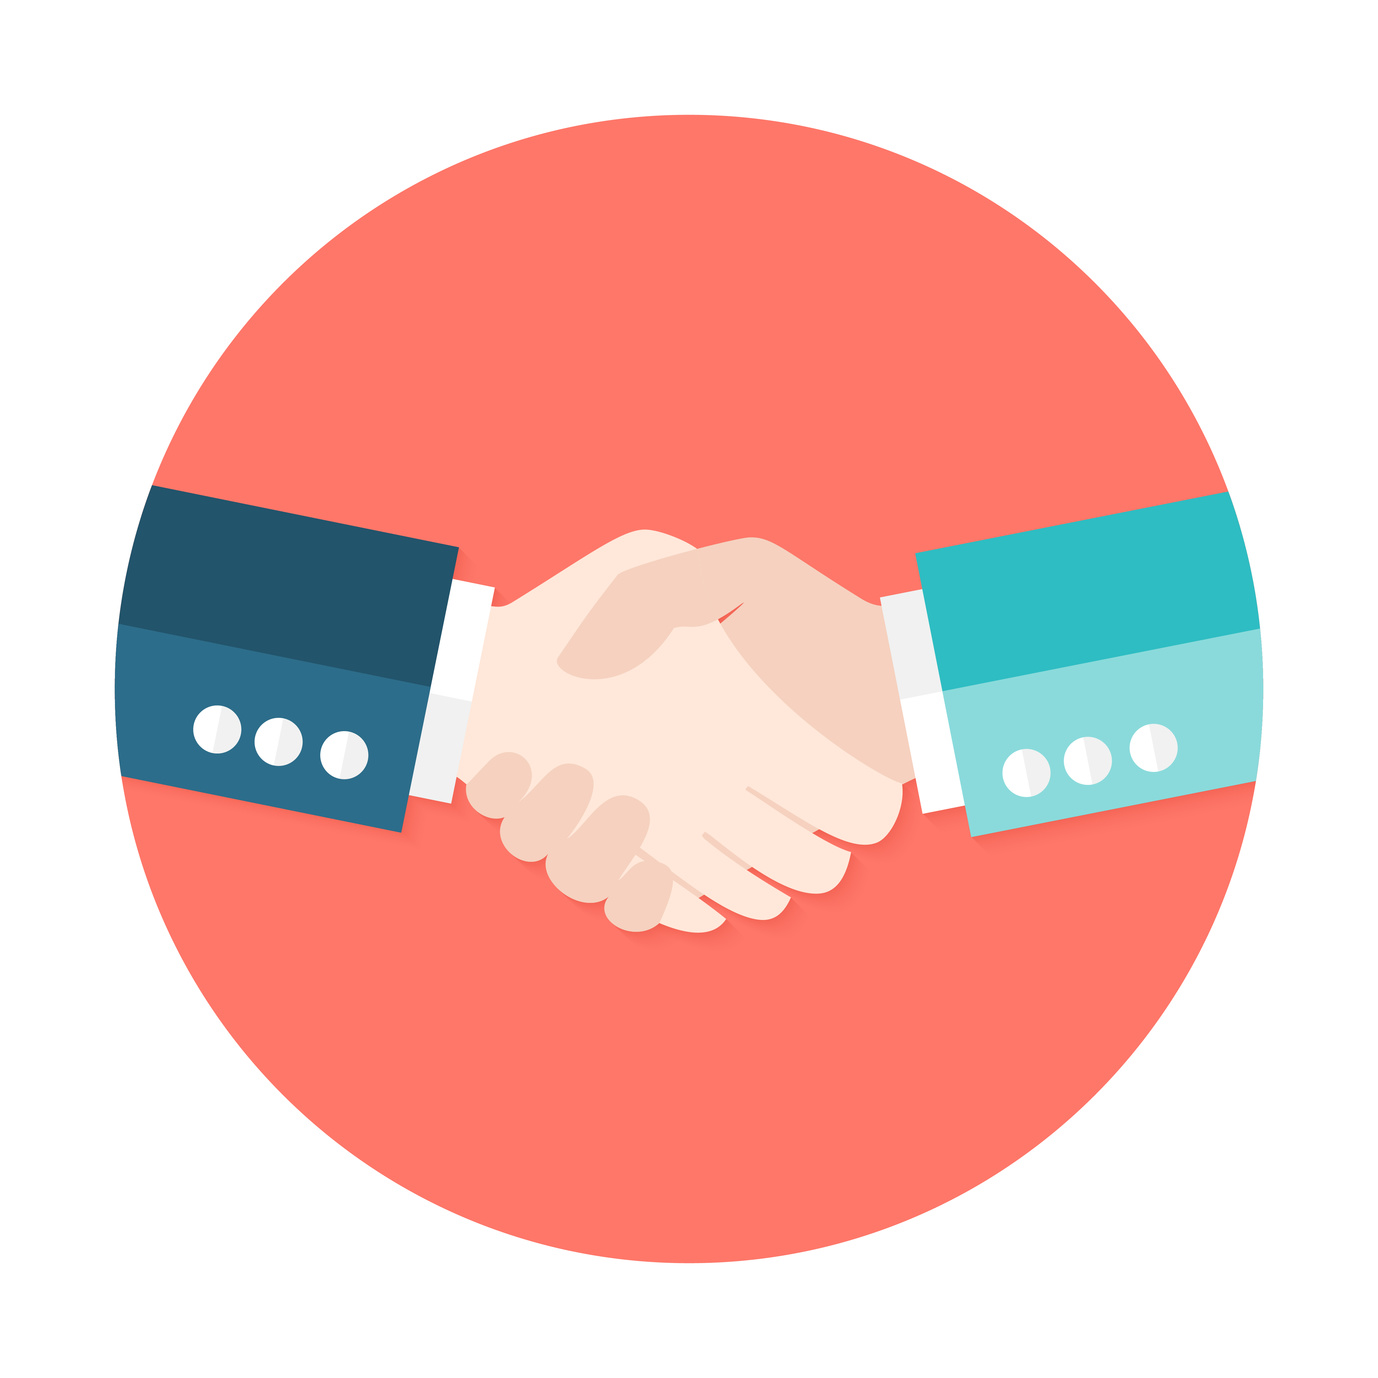 Illustration of Two Businessmen Shaking Hands Flat Circle Icon